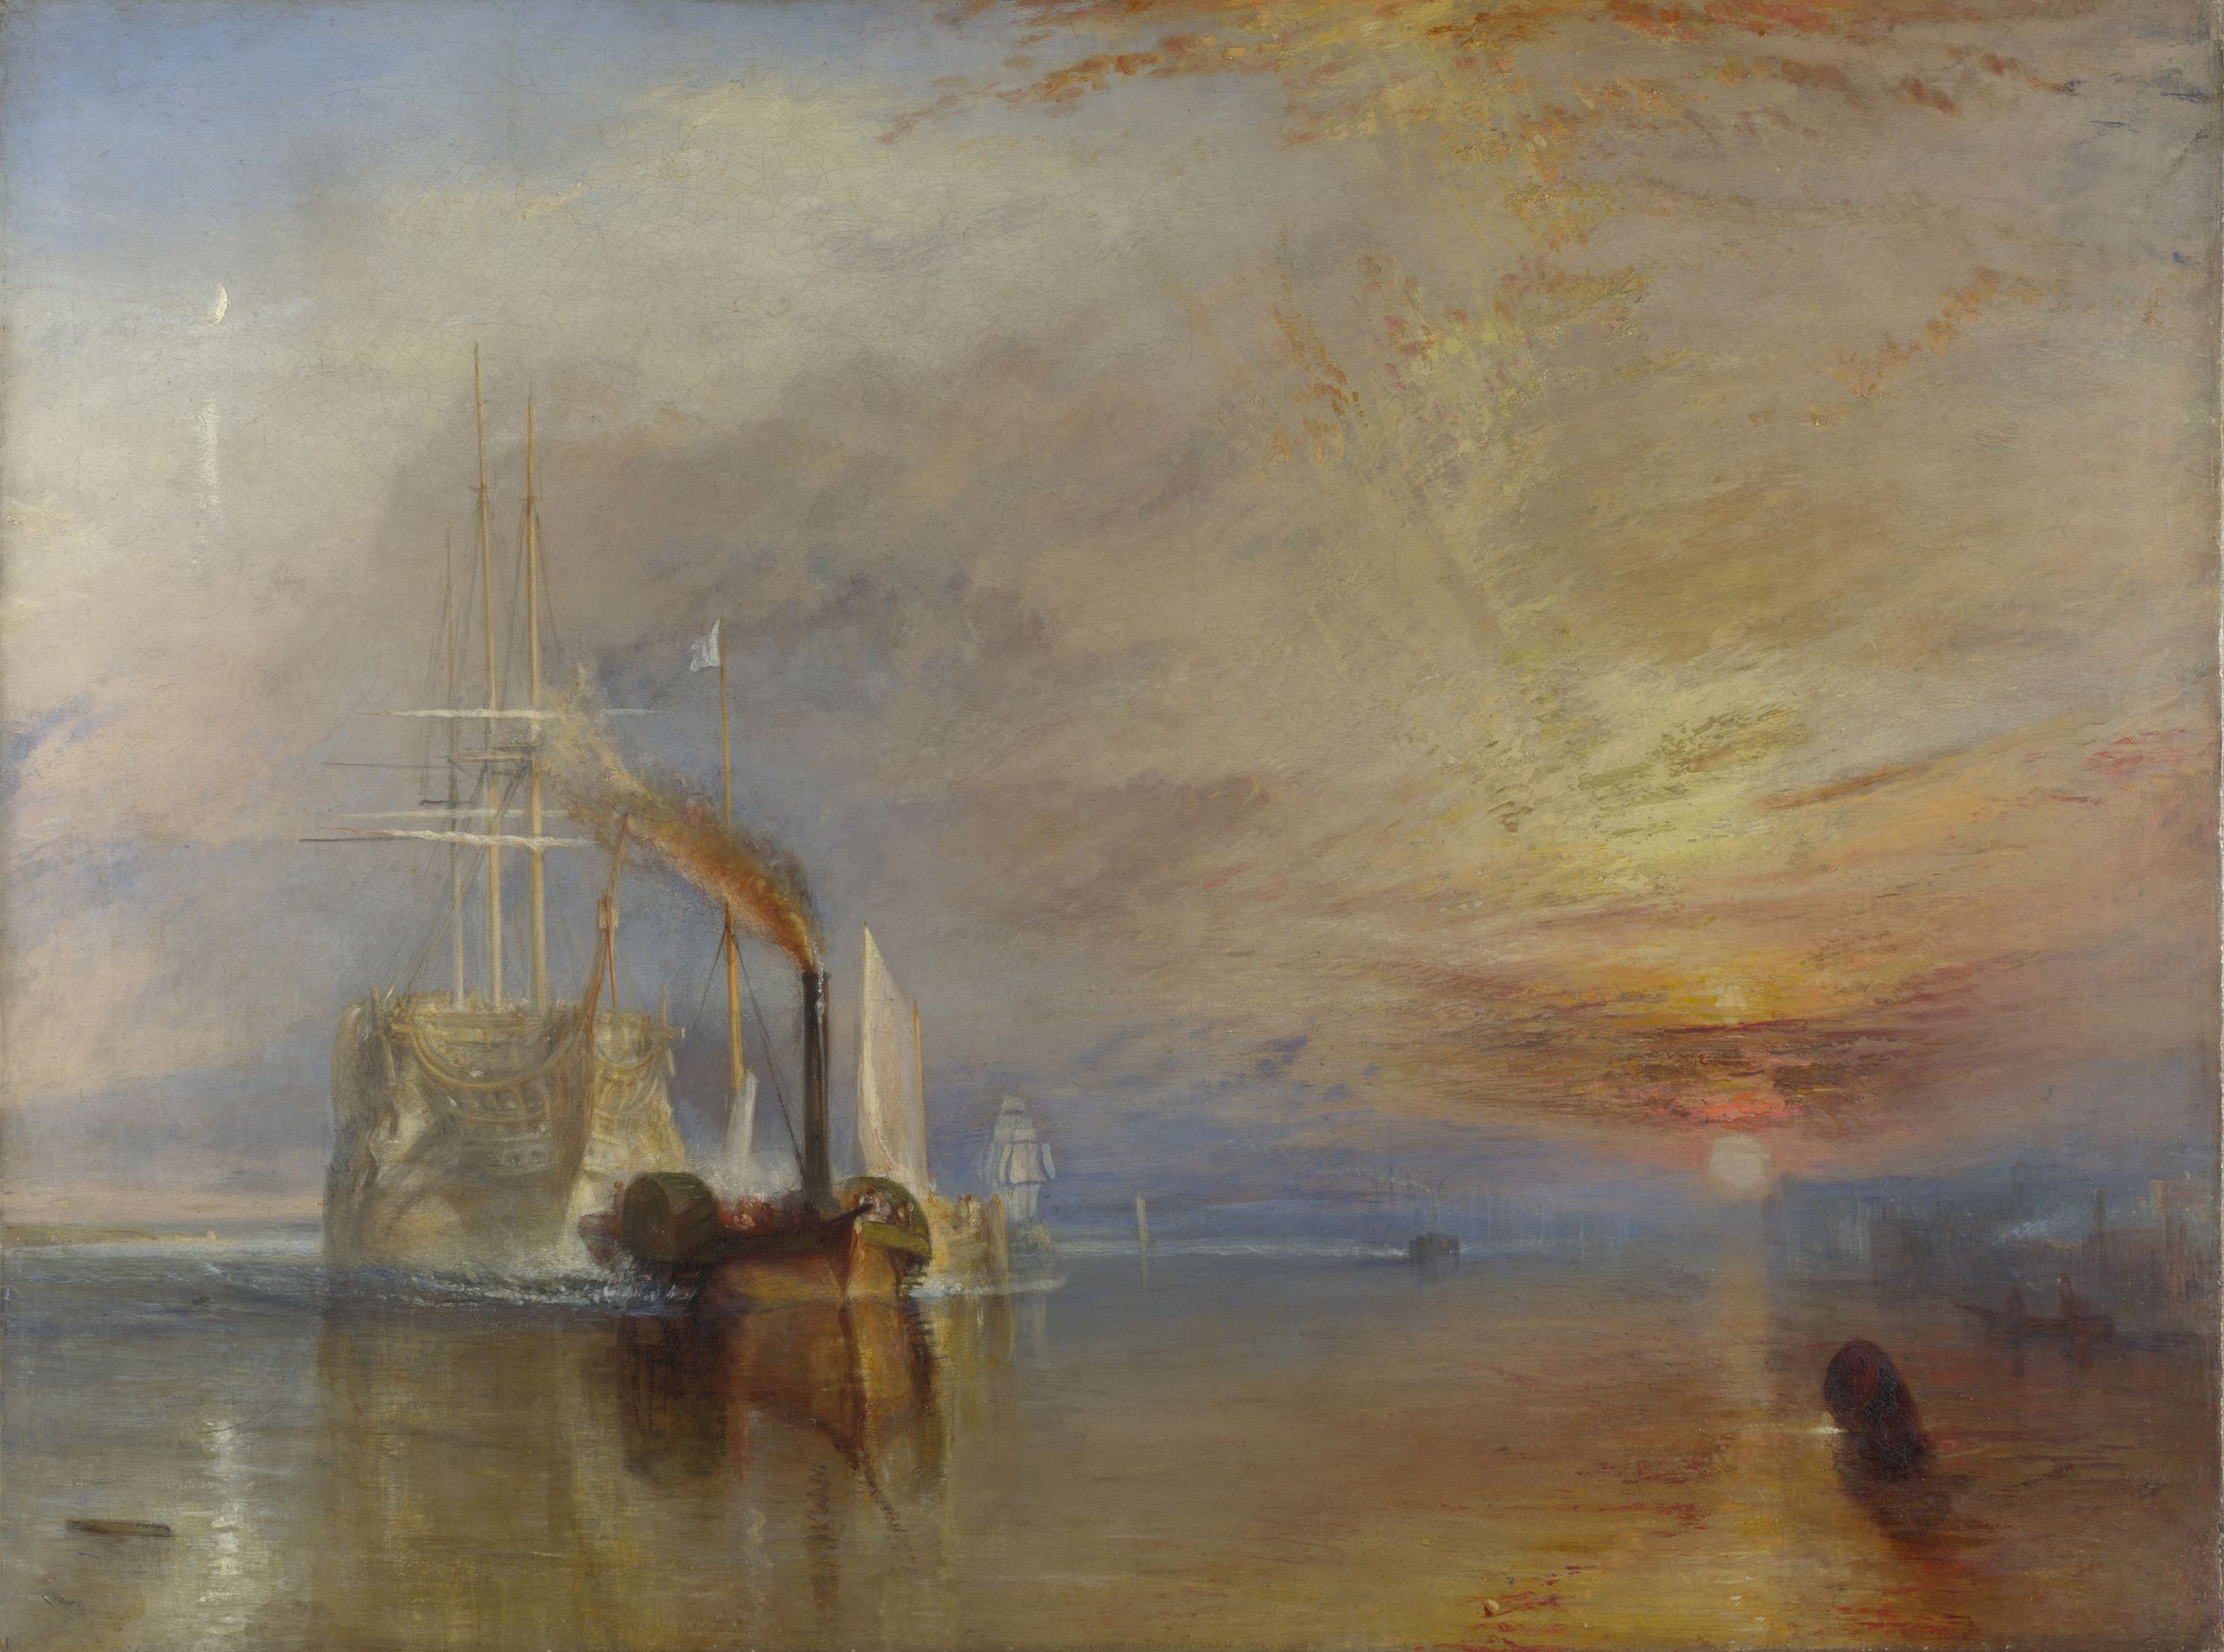 A harcos Temeraire by Joseph Mallord William Turner - 1839 - 91 cm x 1,22 m 